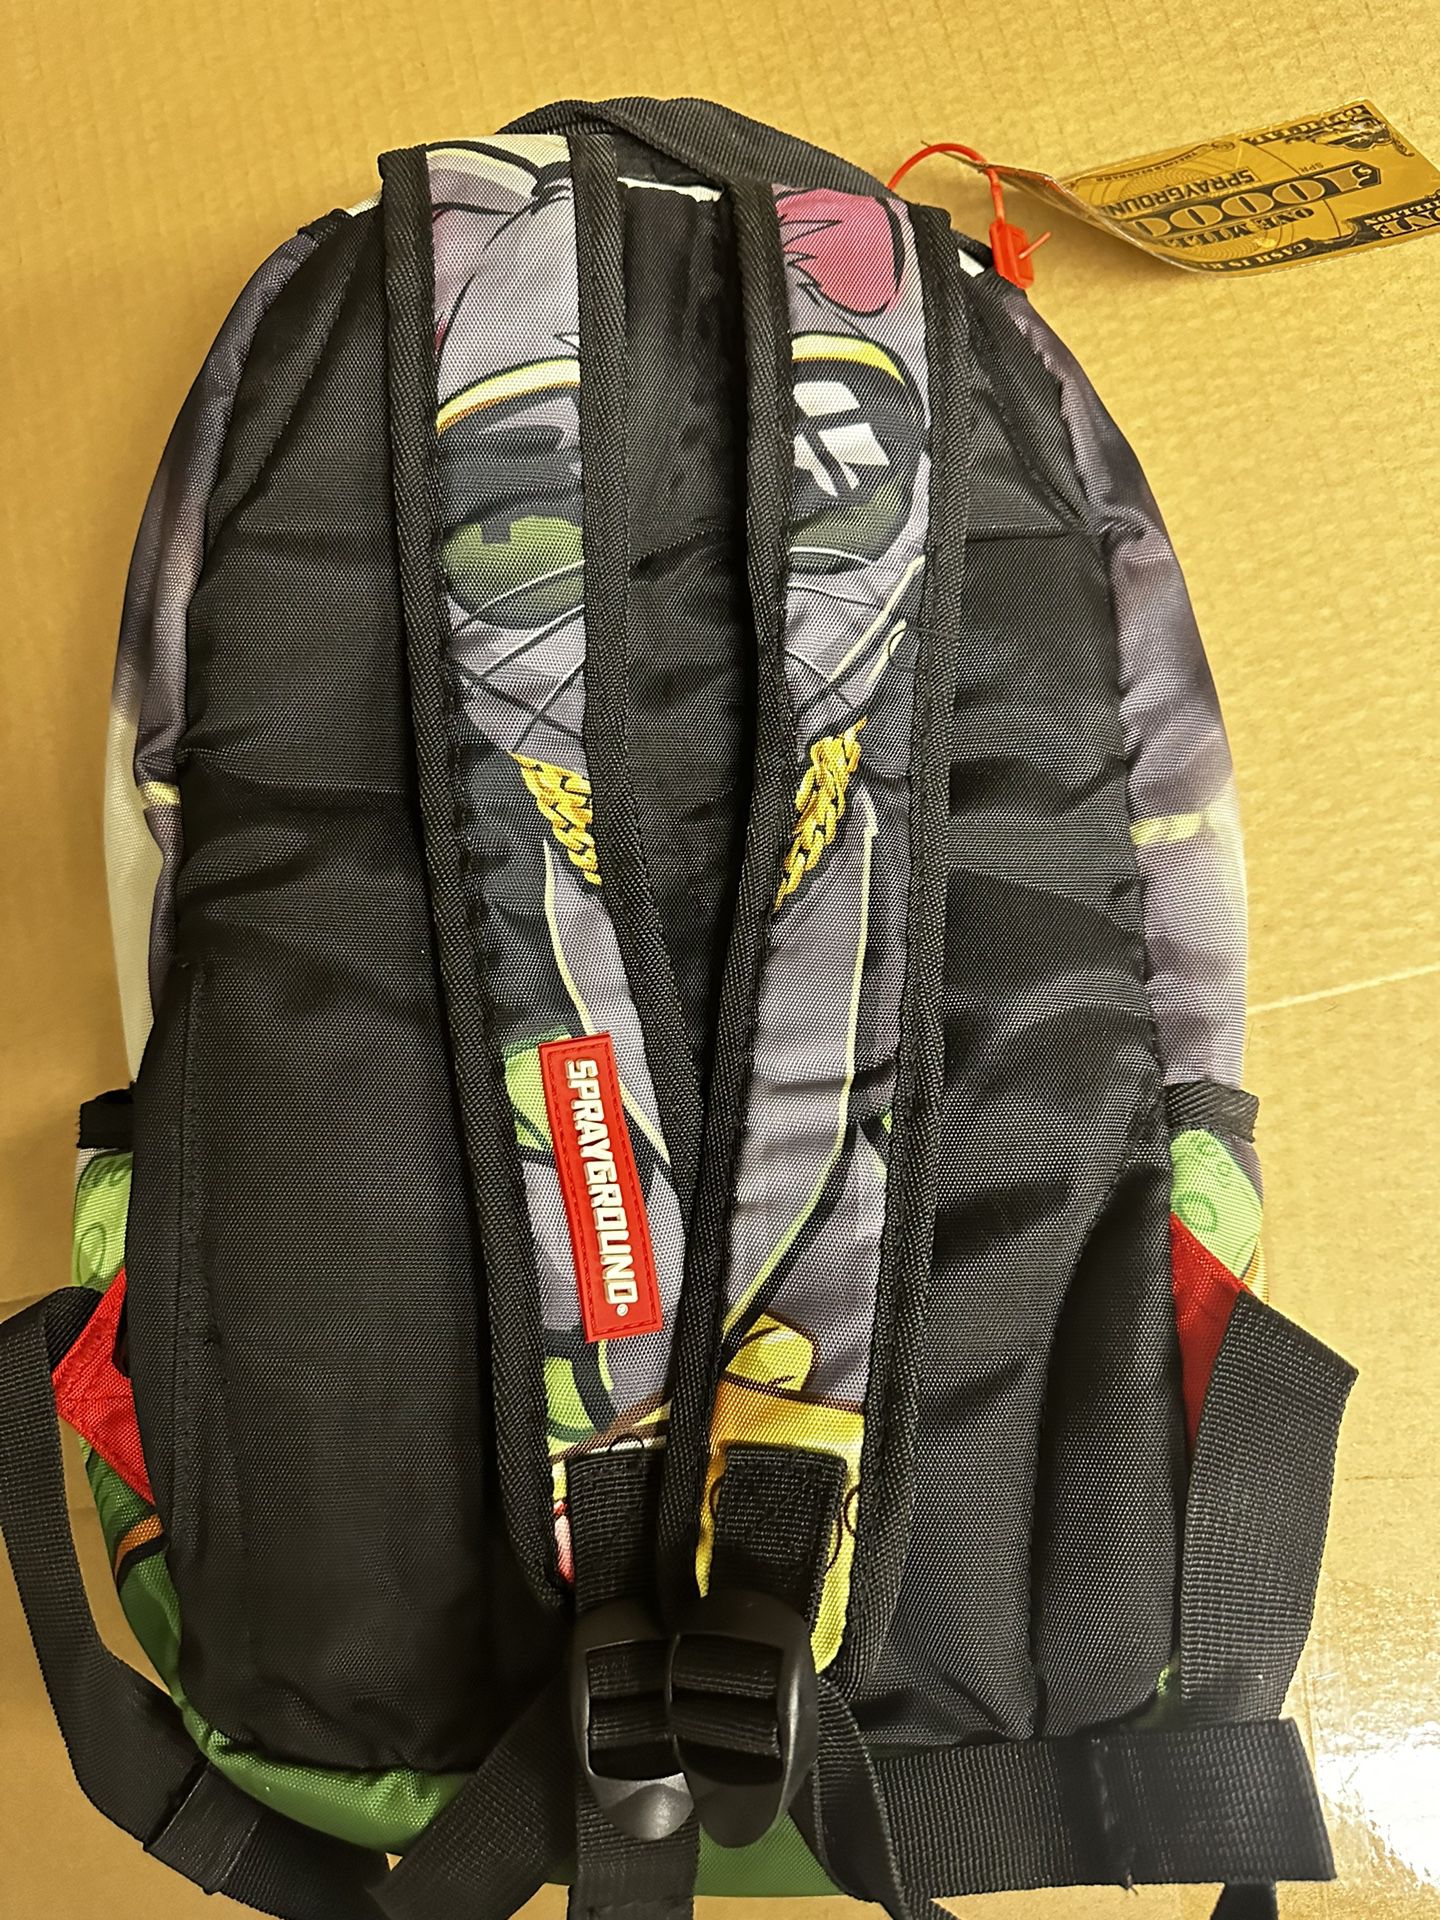 SPRAYGROUNDS Backpacks for Sale in Palmdale, CA - OfferUp